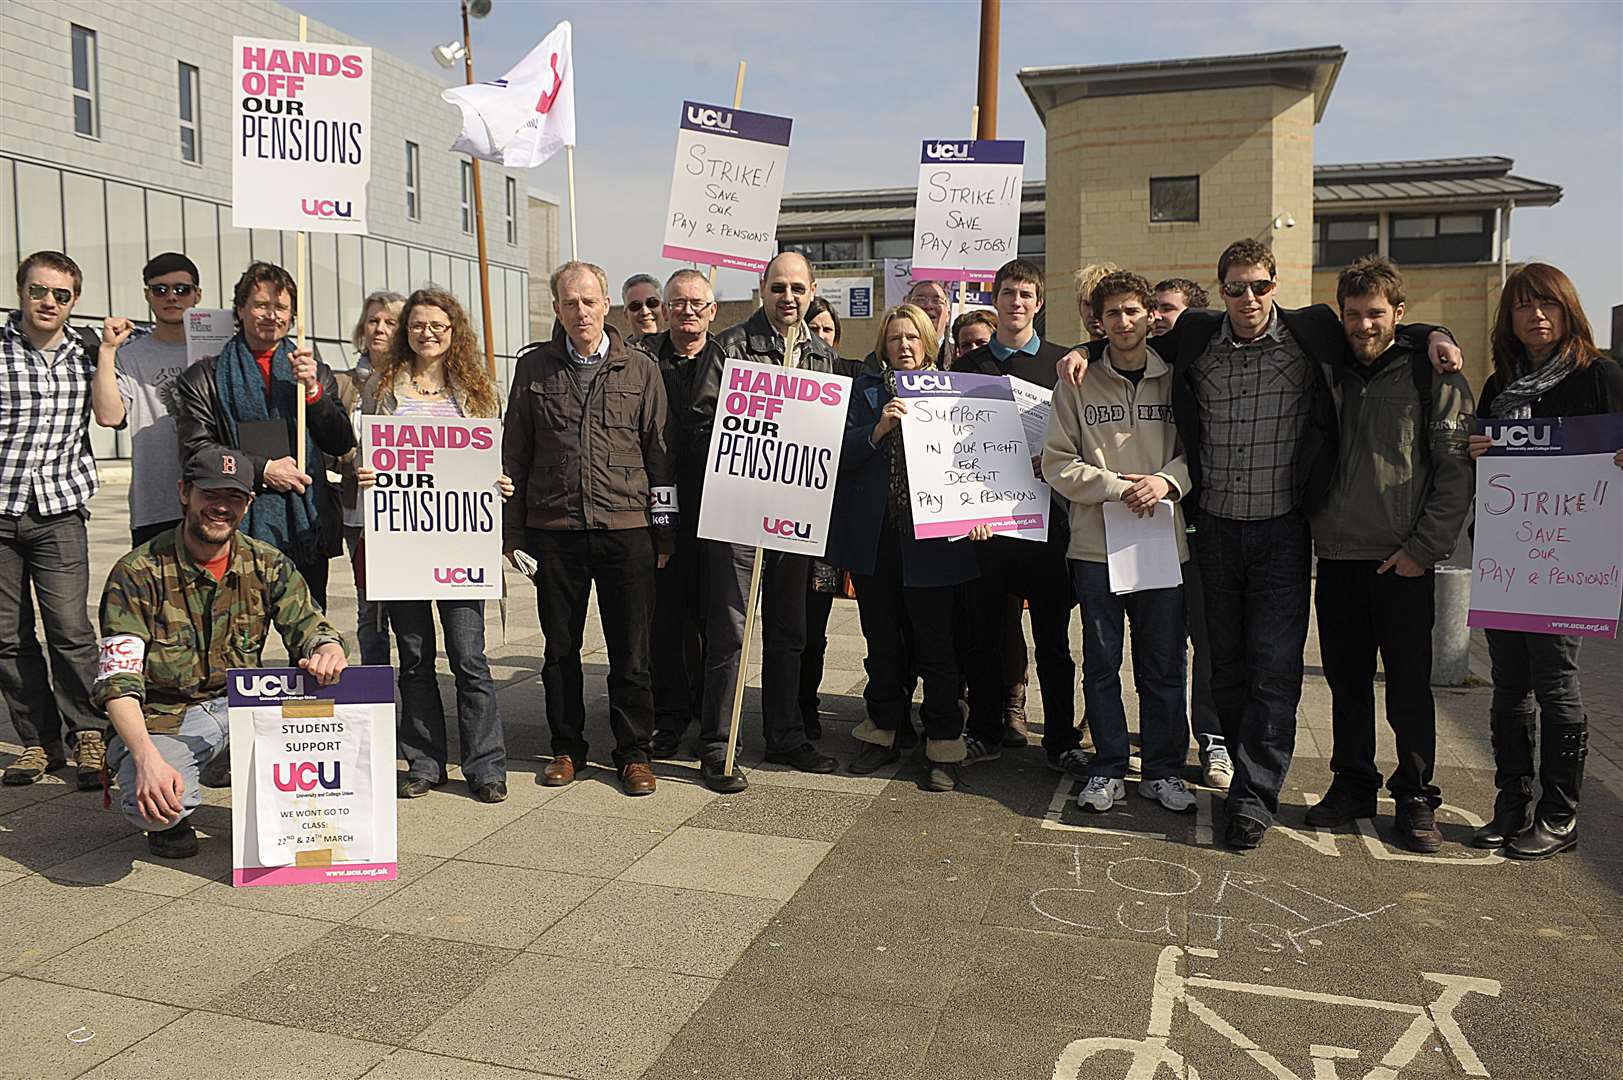 Lecturers went on strike over pensions in 2011